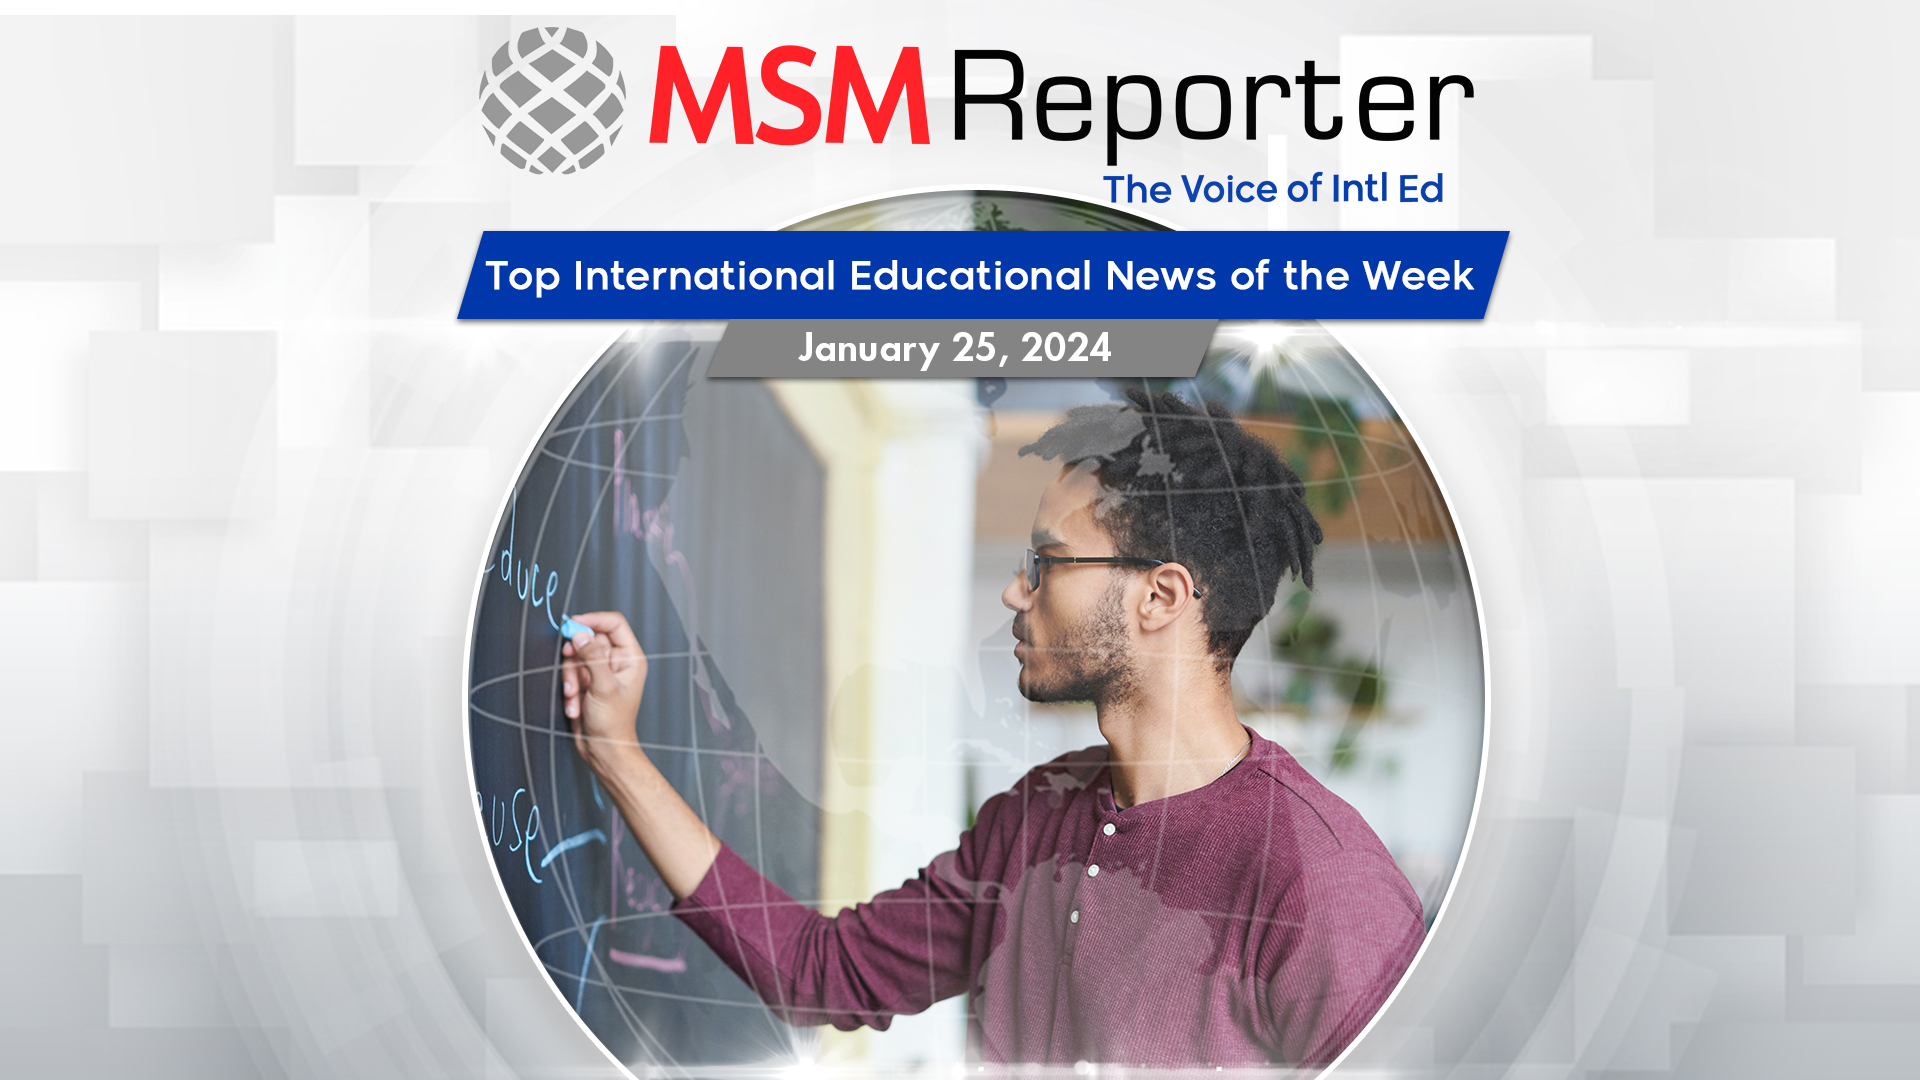 Canada’s 2-year cap on study visa issuance, funding strain in UK unis, and more in this week’s MSM Reporter